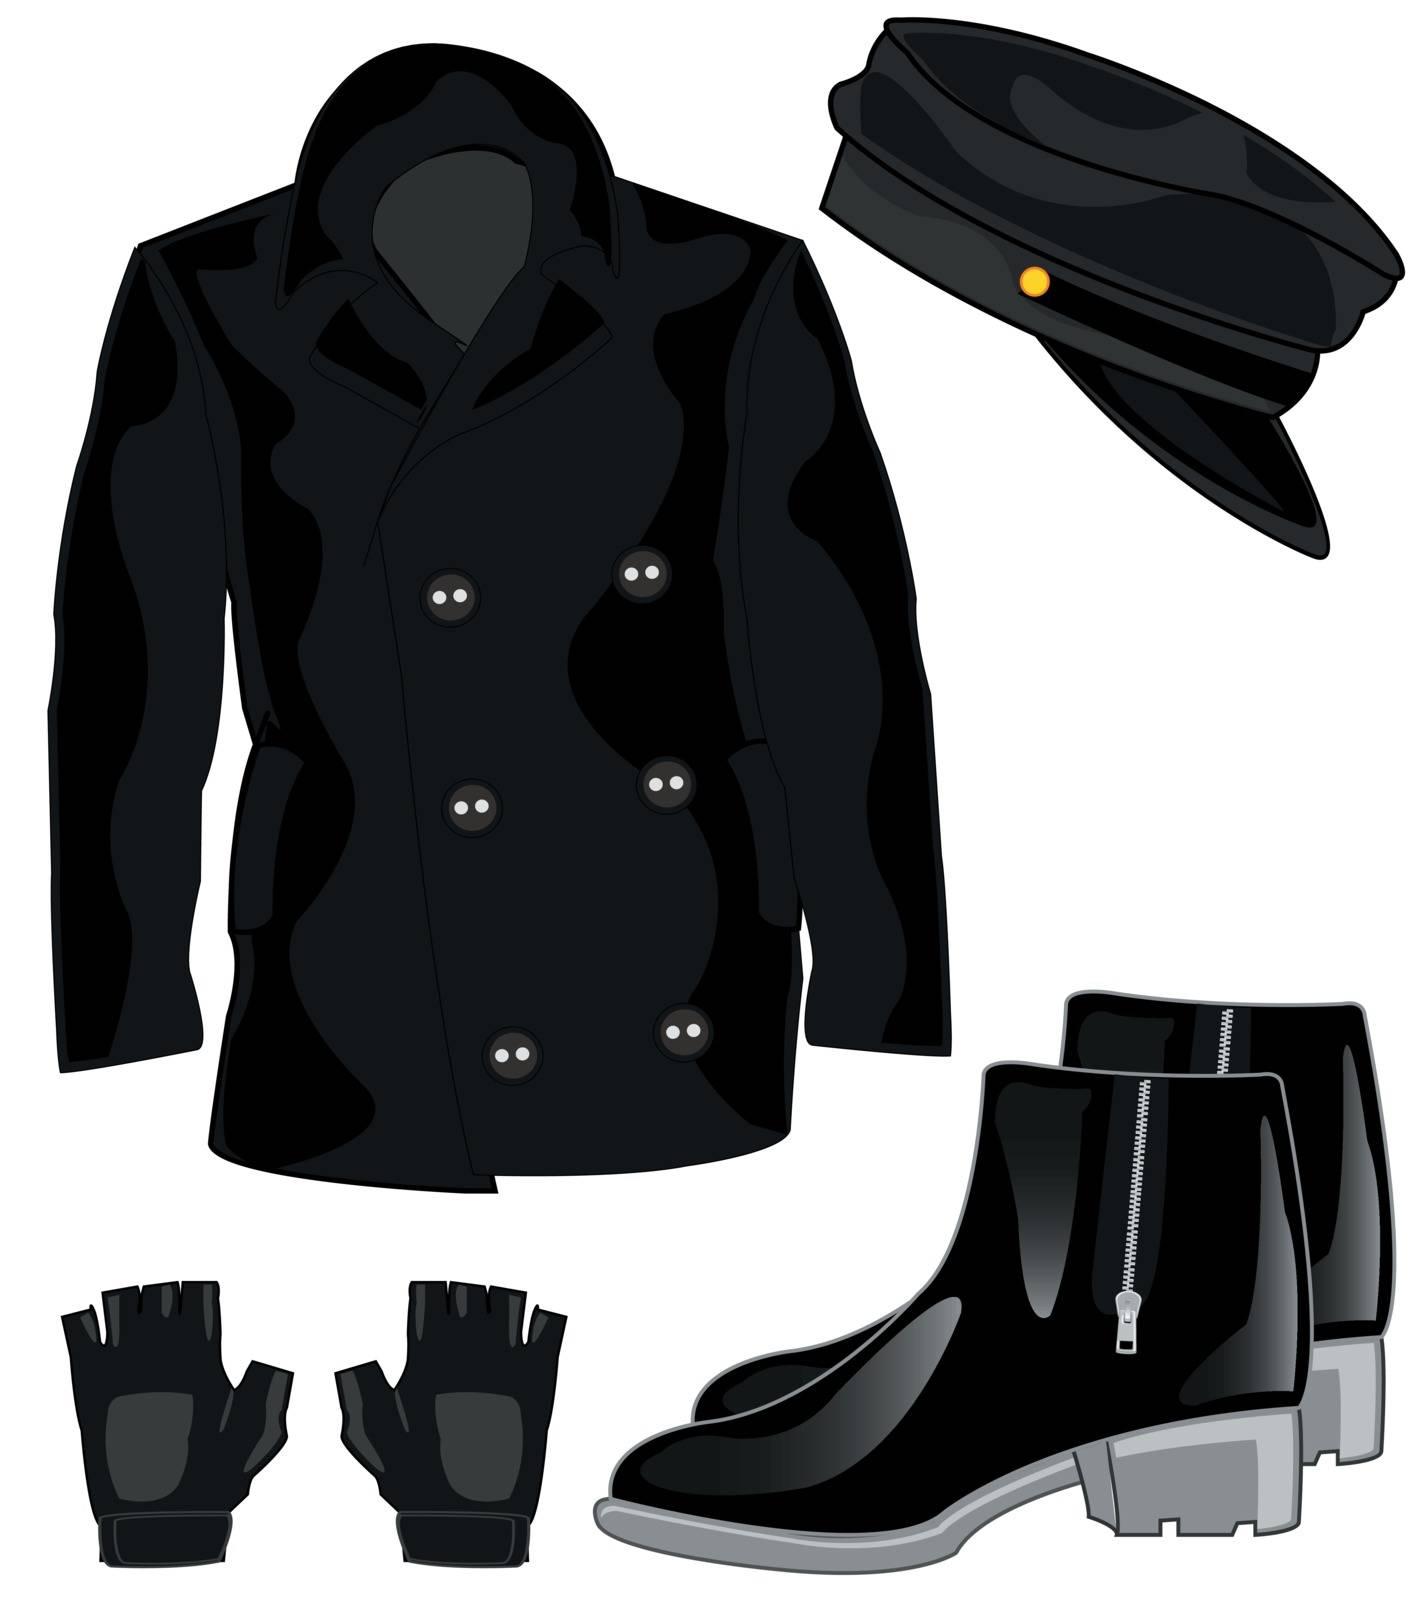 Cloth coat and footwear with cap and glove